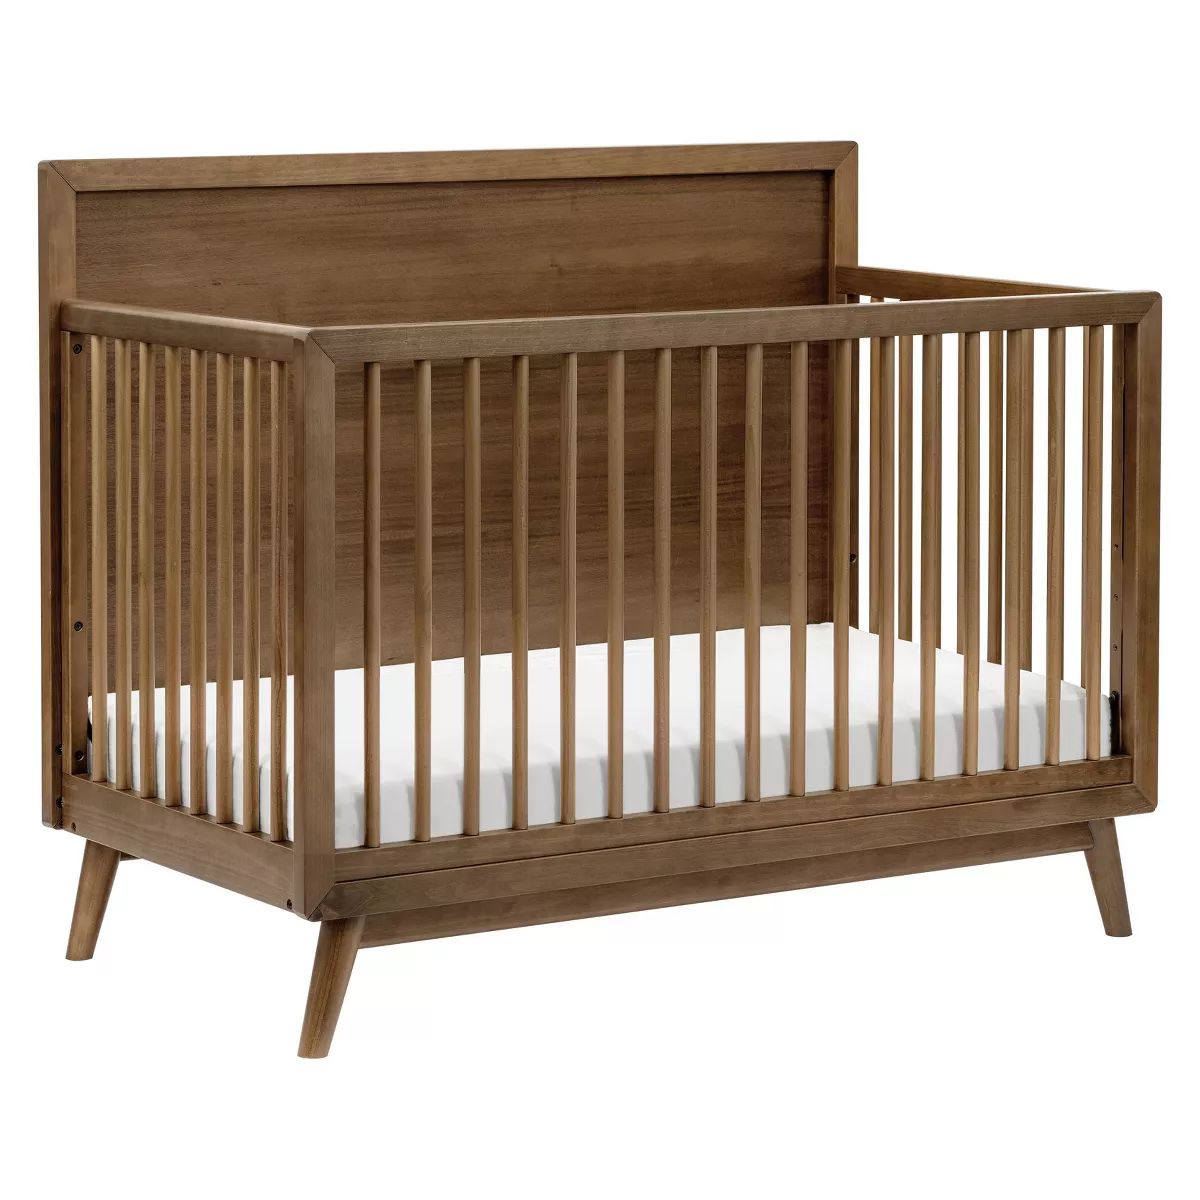 Babyletto Palma Mid-Century 4-in-1 Convertible Crib with Toddler Bed Conversion | Target